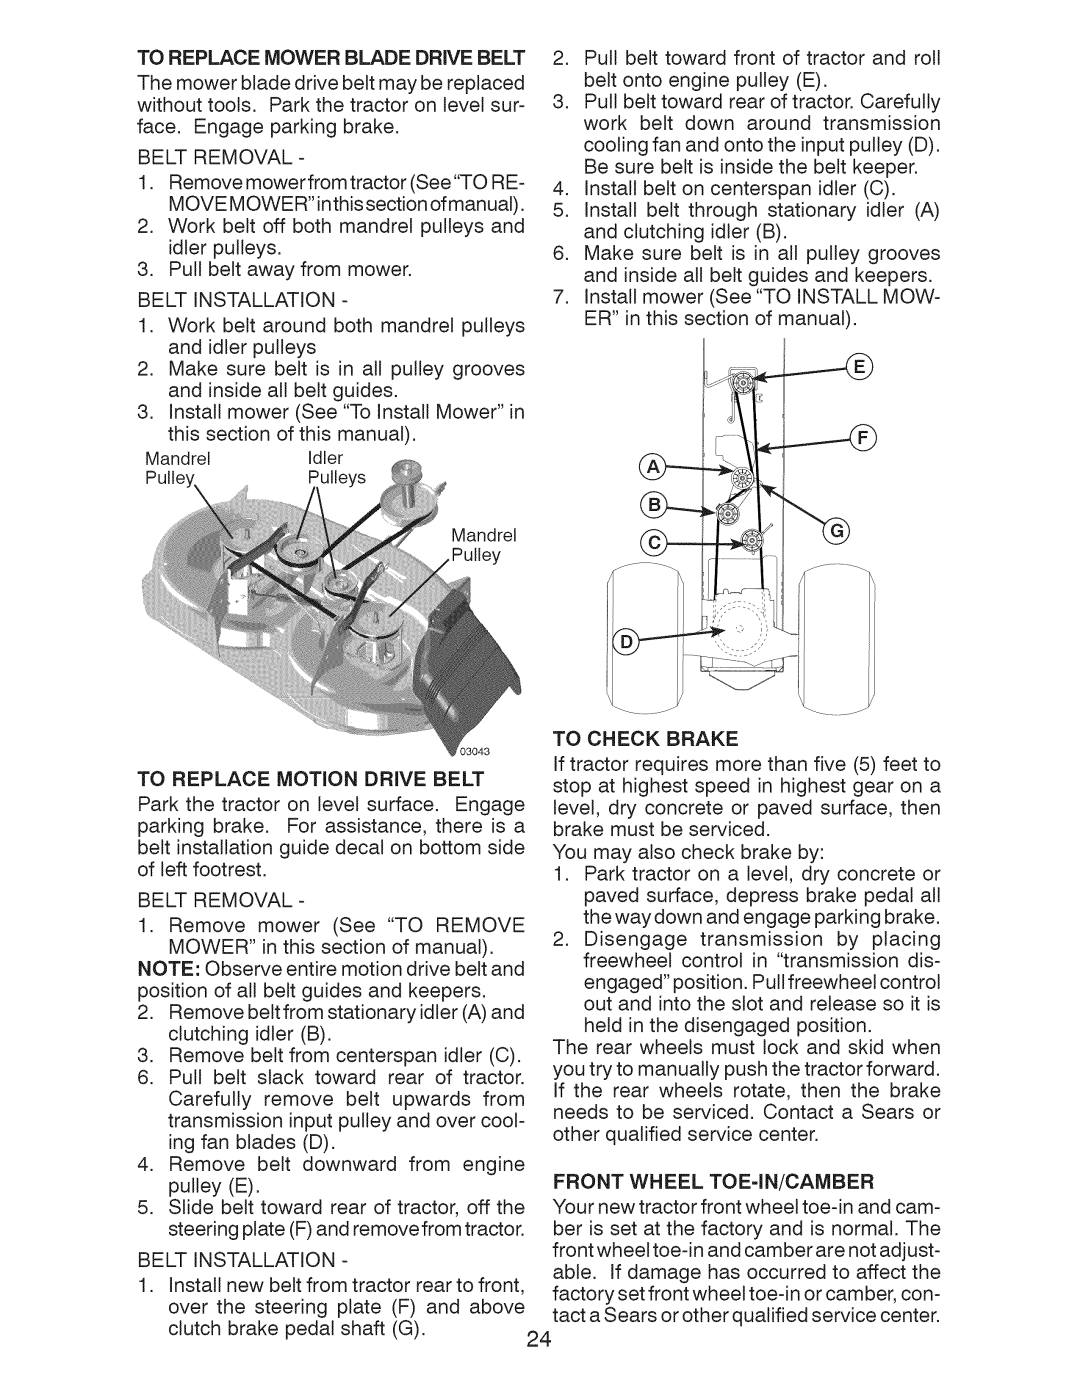 Craftsman 917.289240 owner manual To Replace Mower Blade Drive Belt 